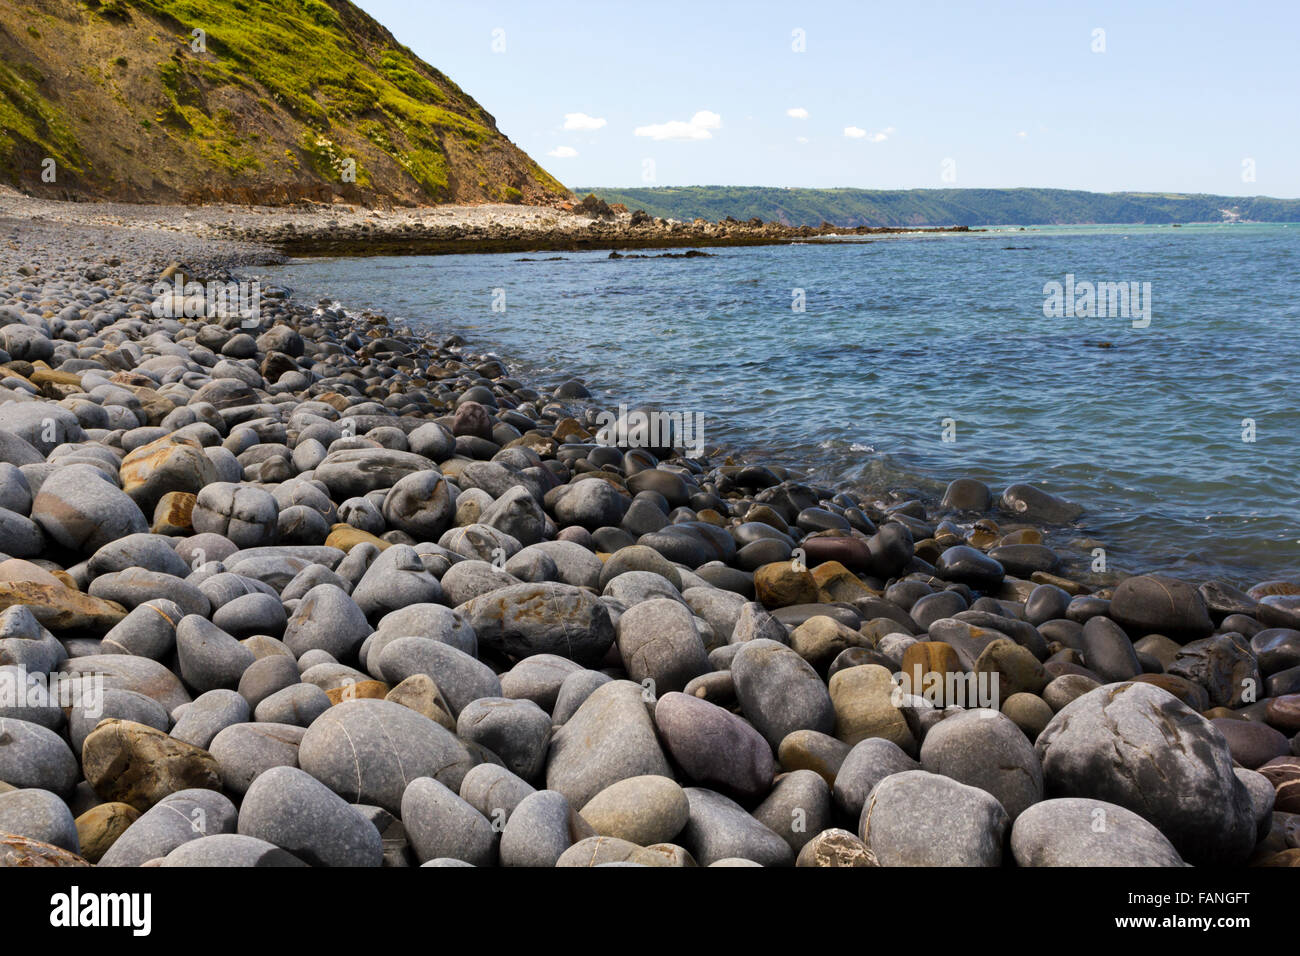 Greencliff Beach Pebble View at High Tide, Looking South West towards Bucks Mills, Devon, UK. Stock Photo